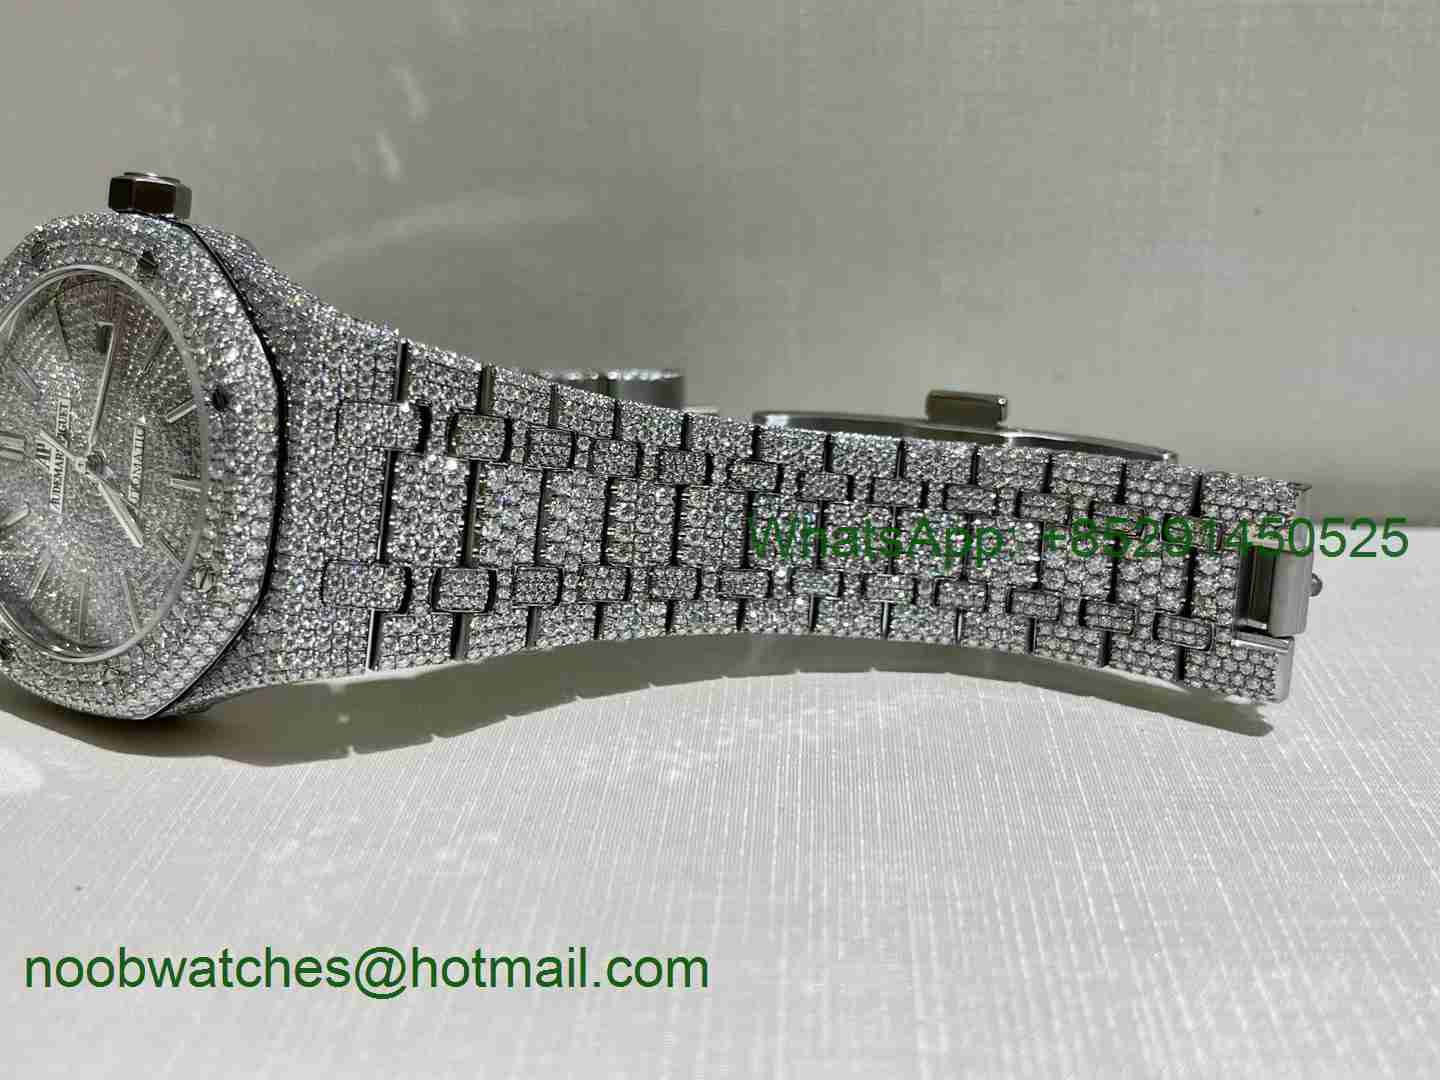 Custom Modify Watch Service - Wrap 18kt Real White Gold And Ice Out Service